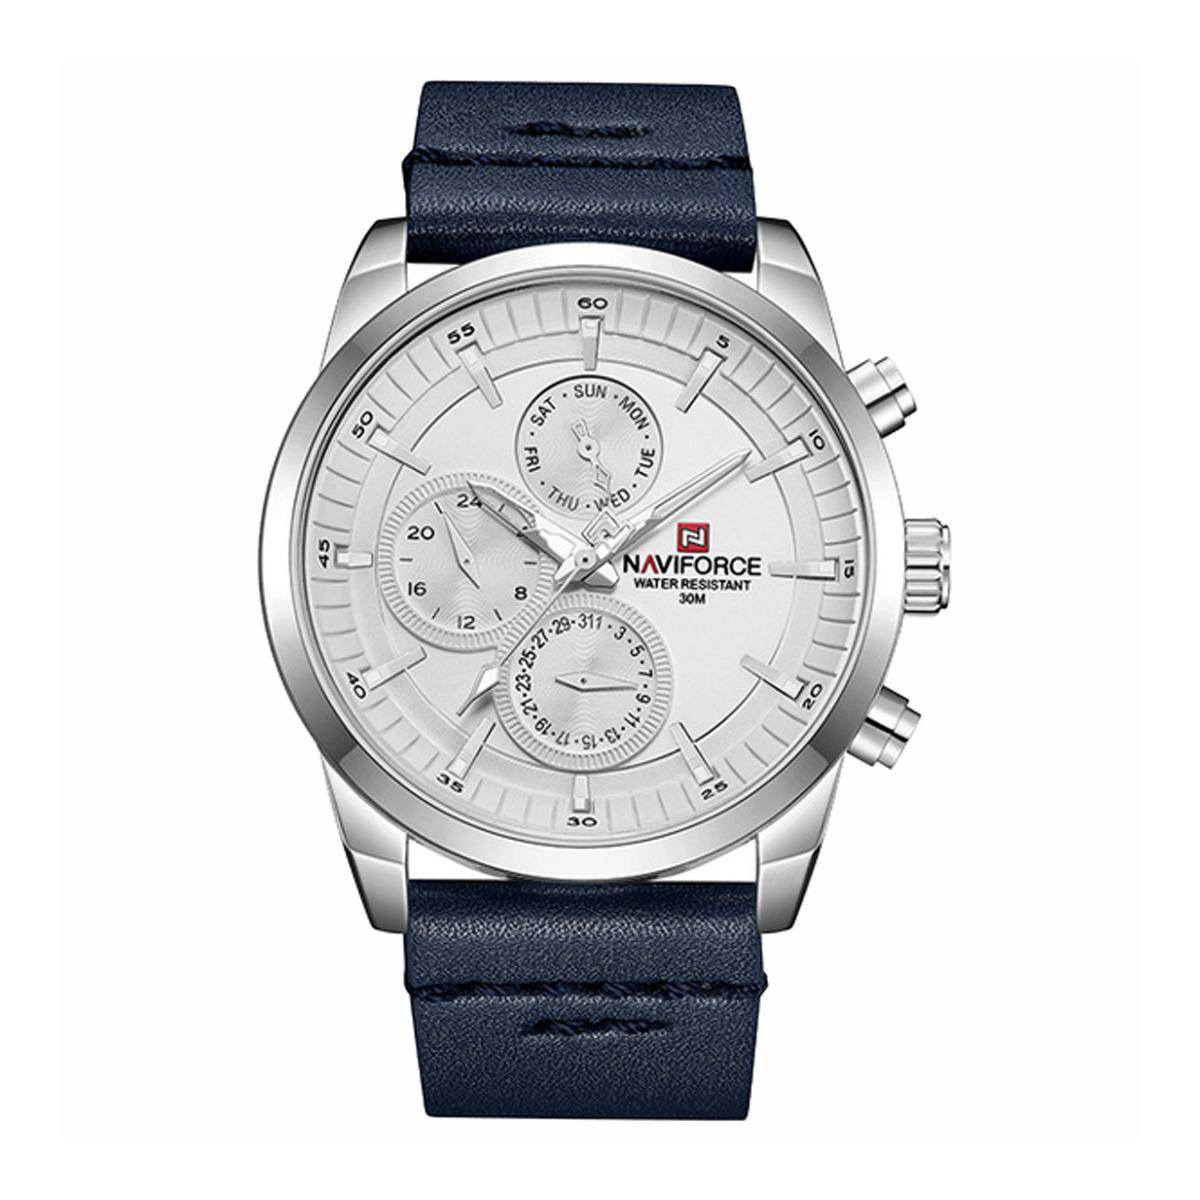 NAVIFORCE Navy Blue PU Leather Chronograph Watch For Men - Silver & Navy Blue